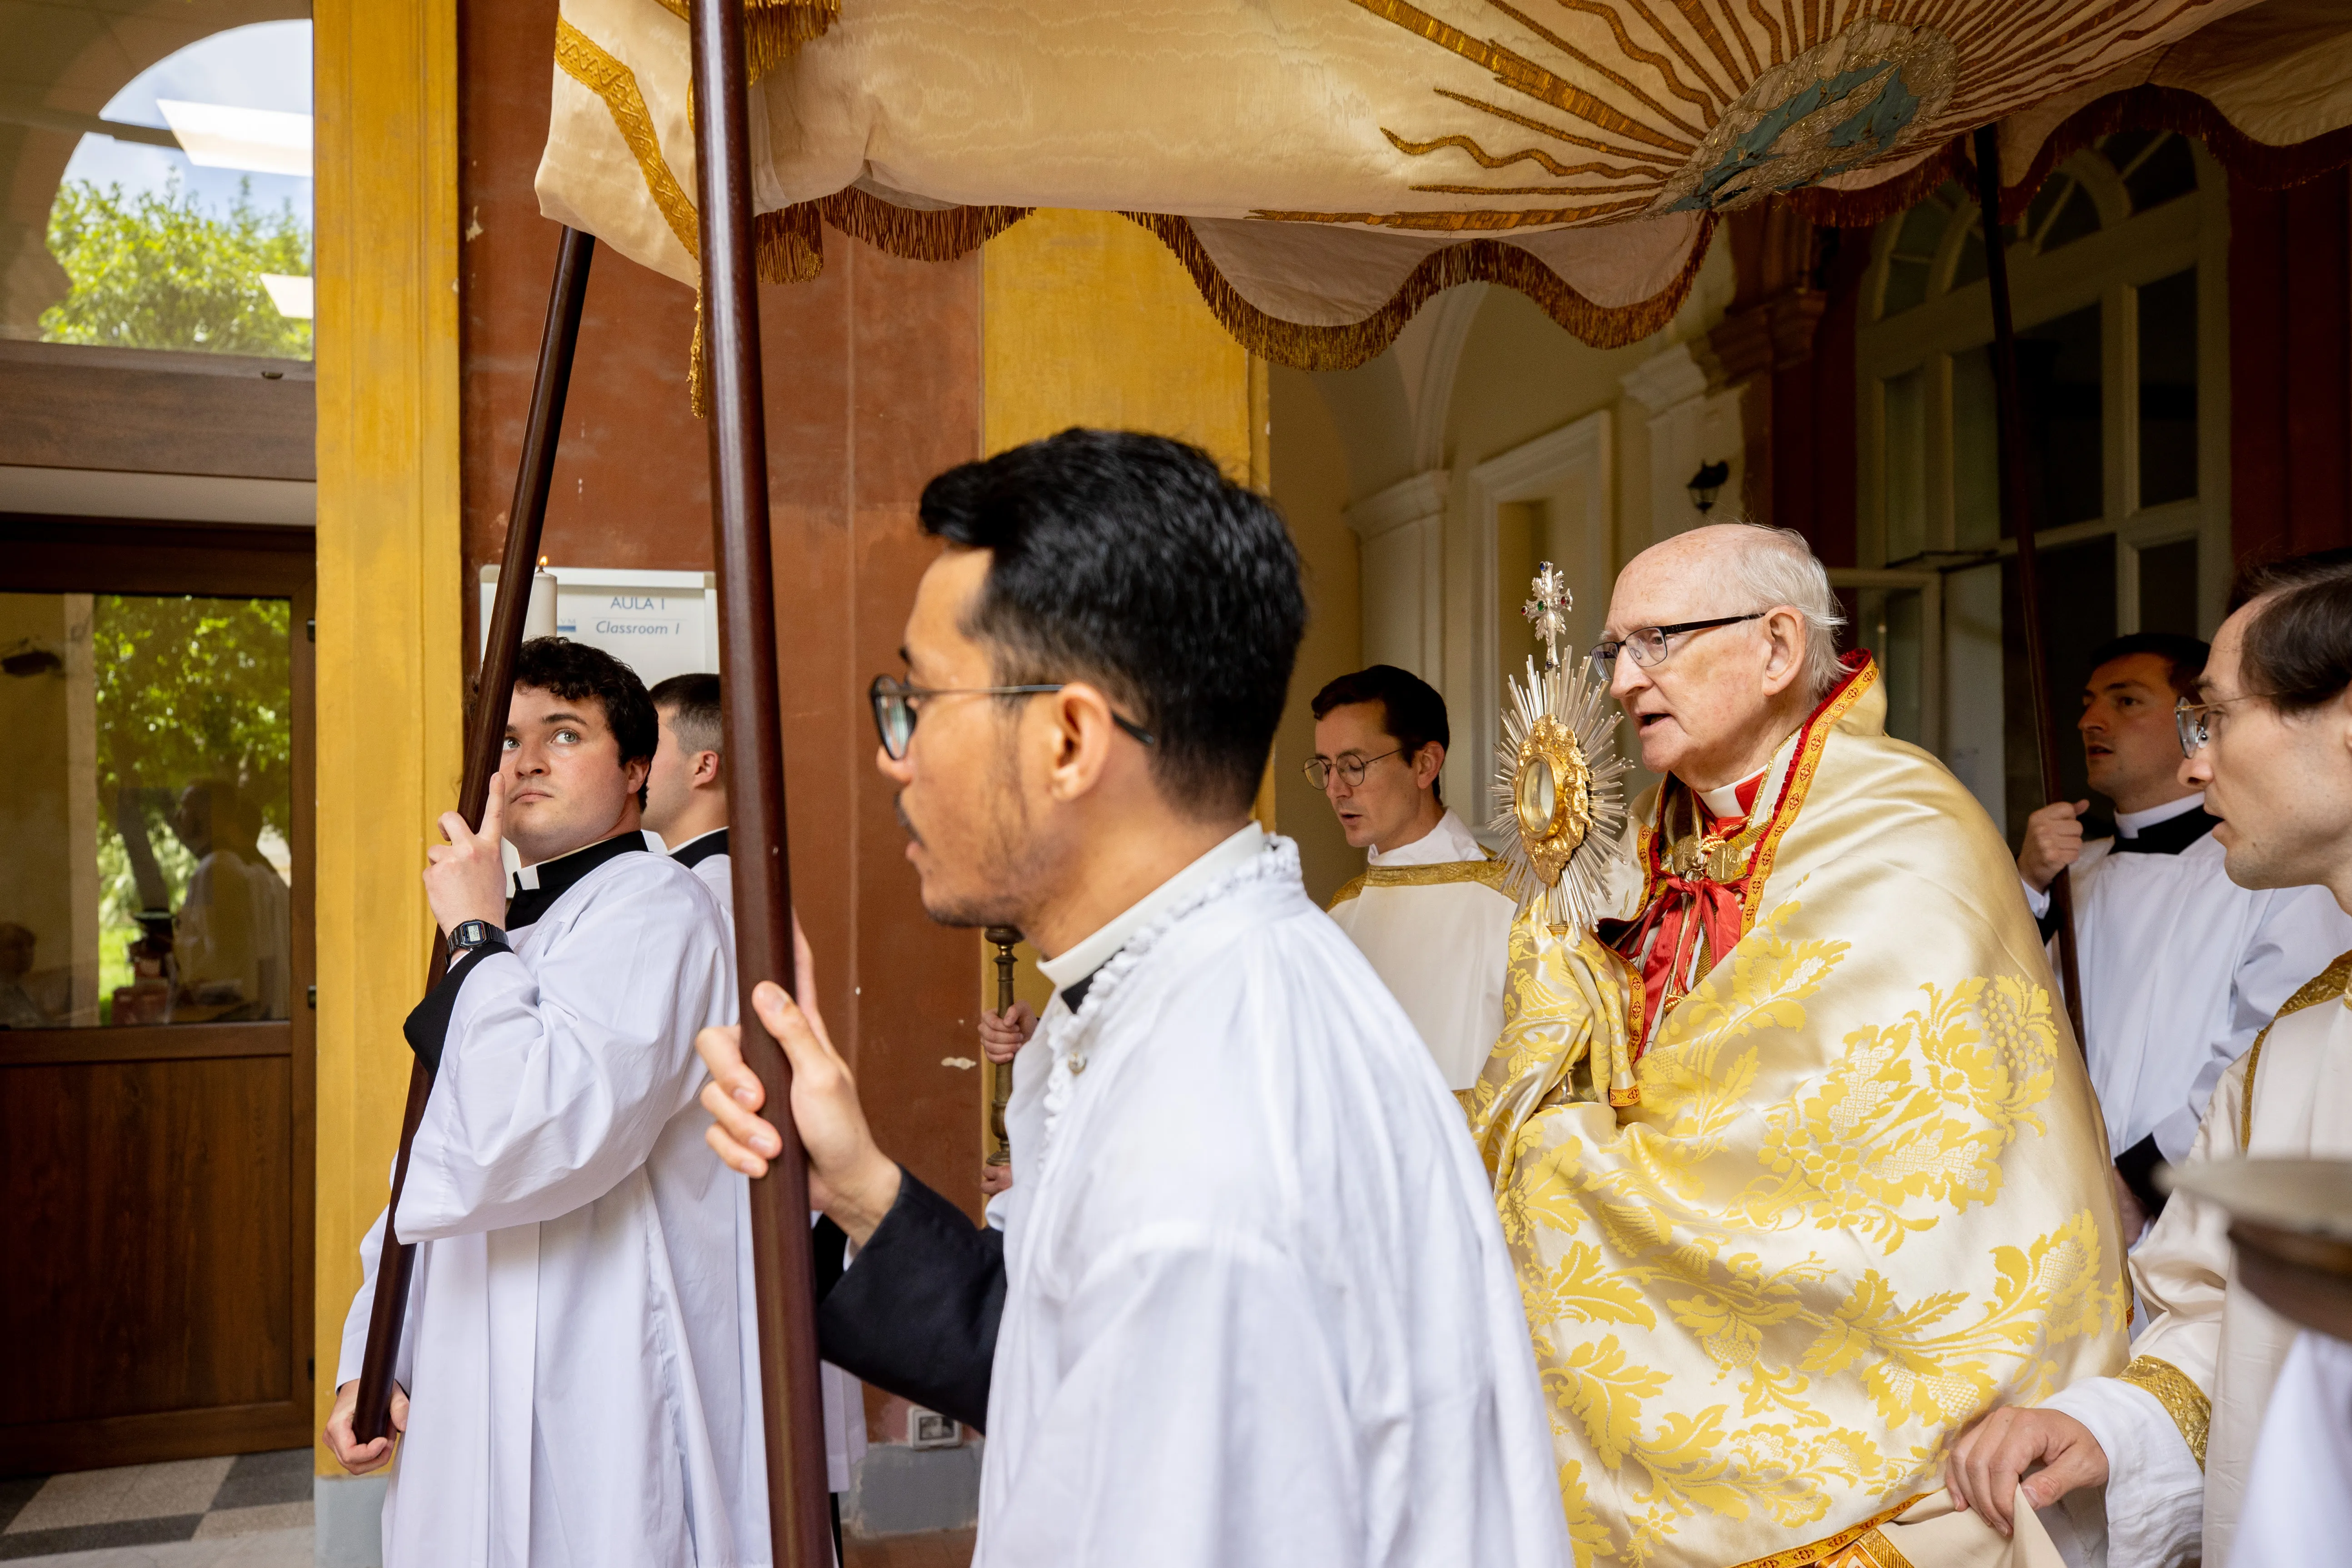 Cardinal James Michael Harvey presided over a eucharistic procession at the University of St. Thomas Aquinas, the Angelicum, in Rome on May 11, 2023. The 22nd edition of the annual procession was attended by about 130 students, faculty, and community members.?w=200&h=150